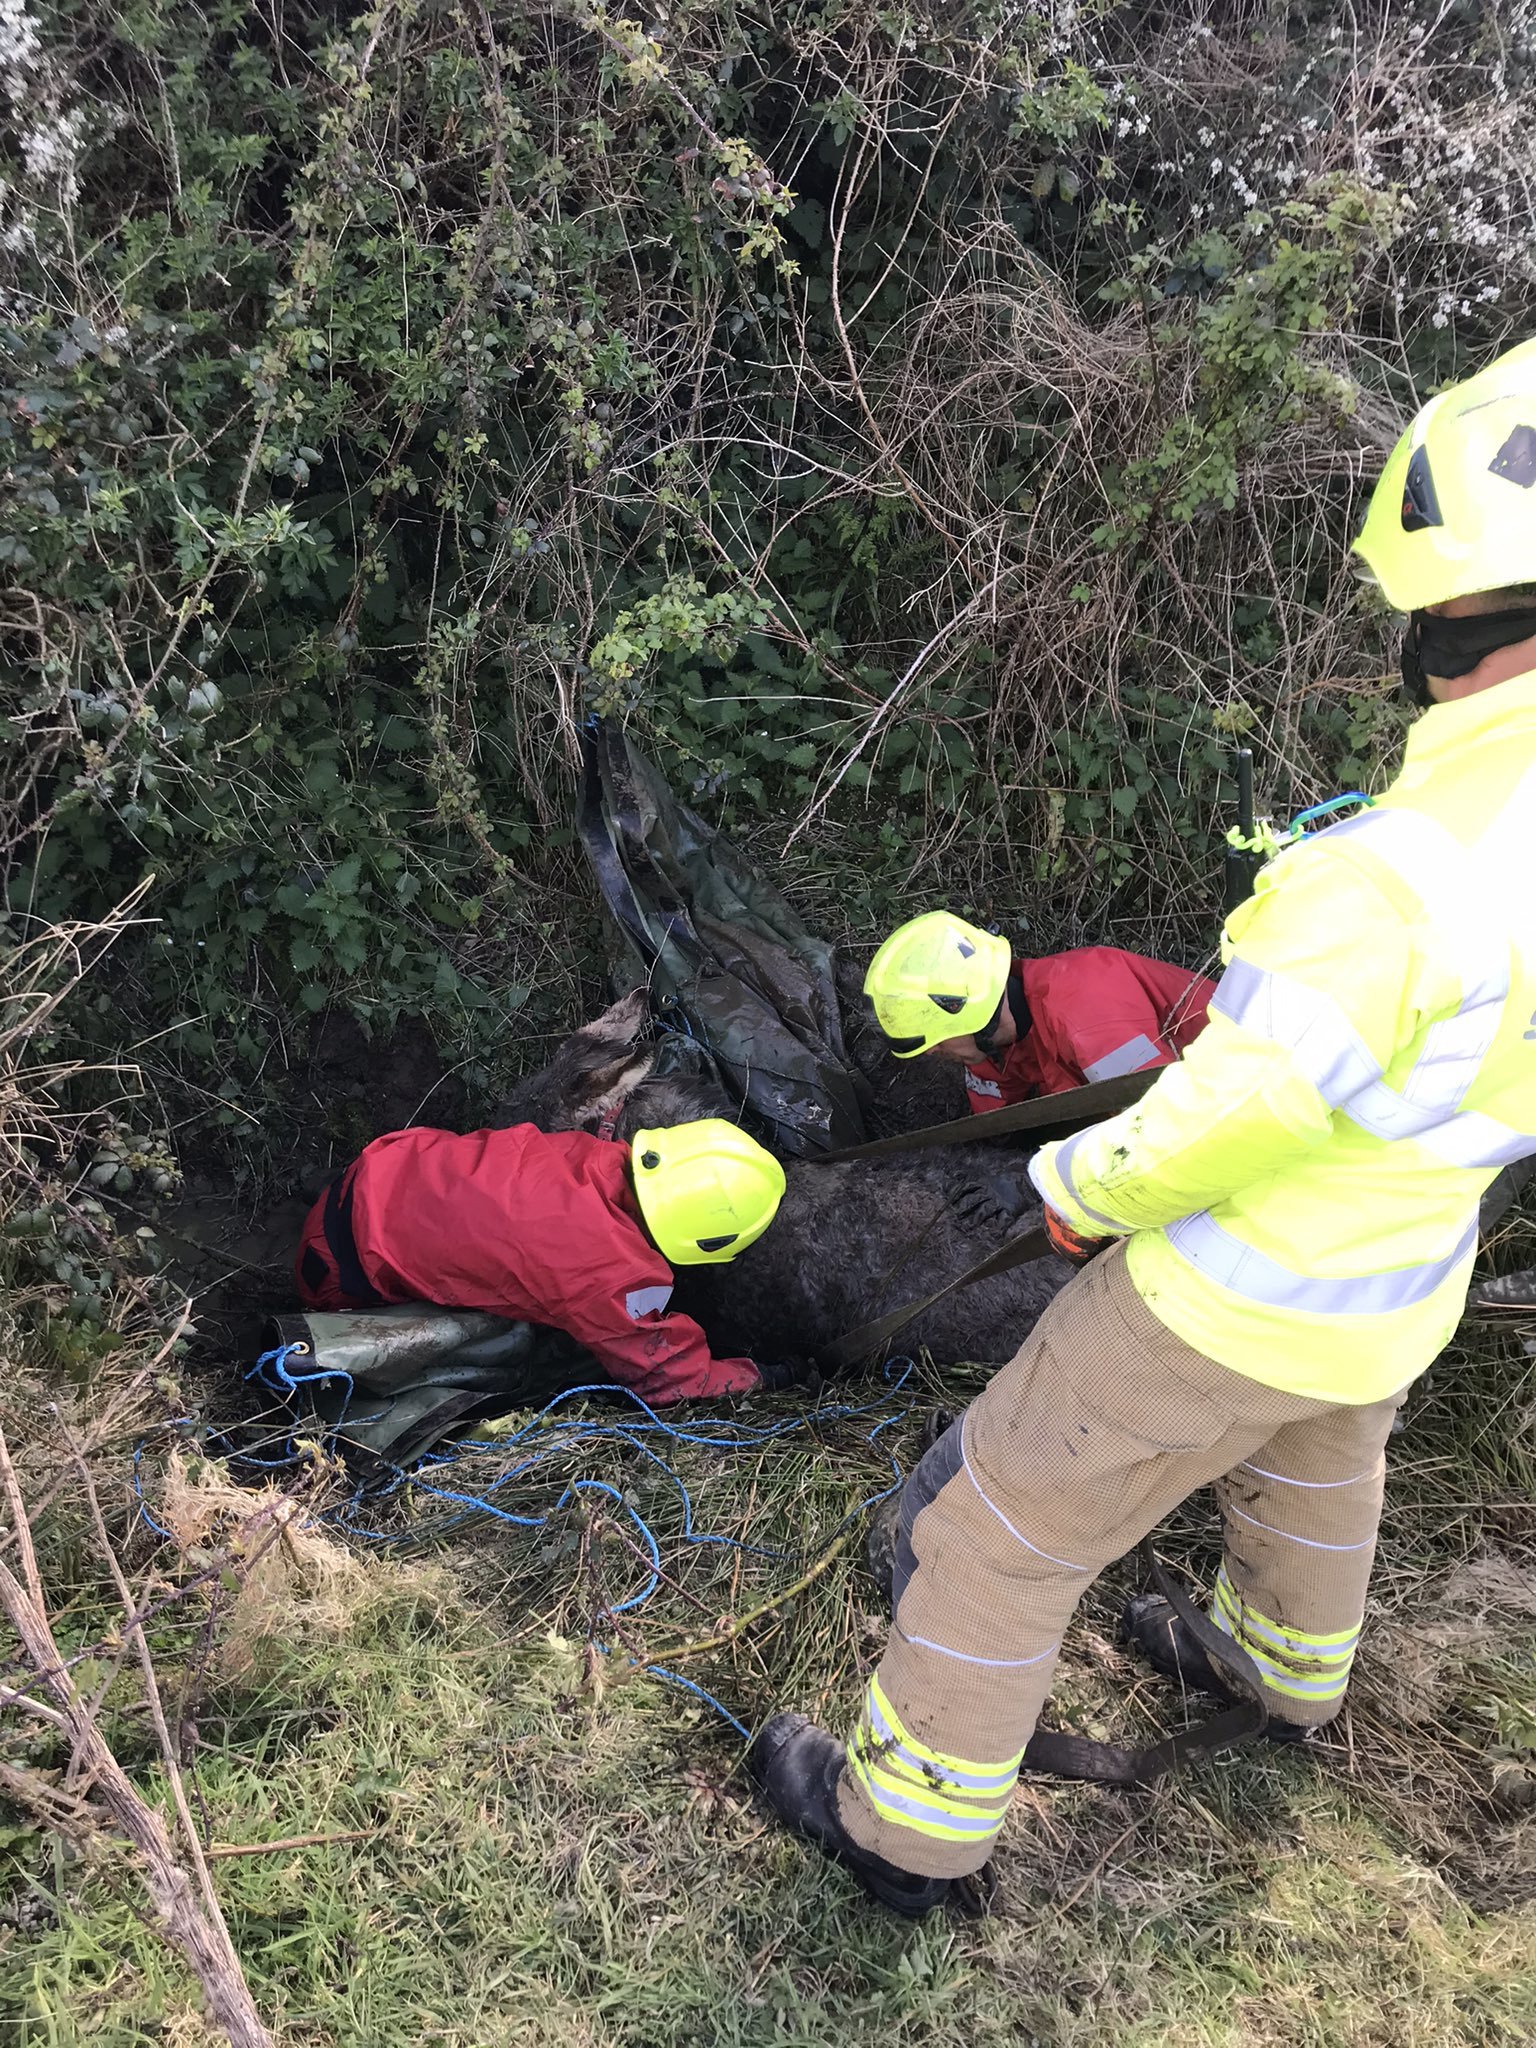 Firefighters work to release the donkey from the ditch